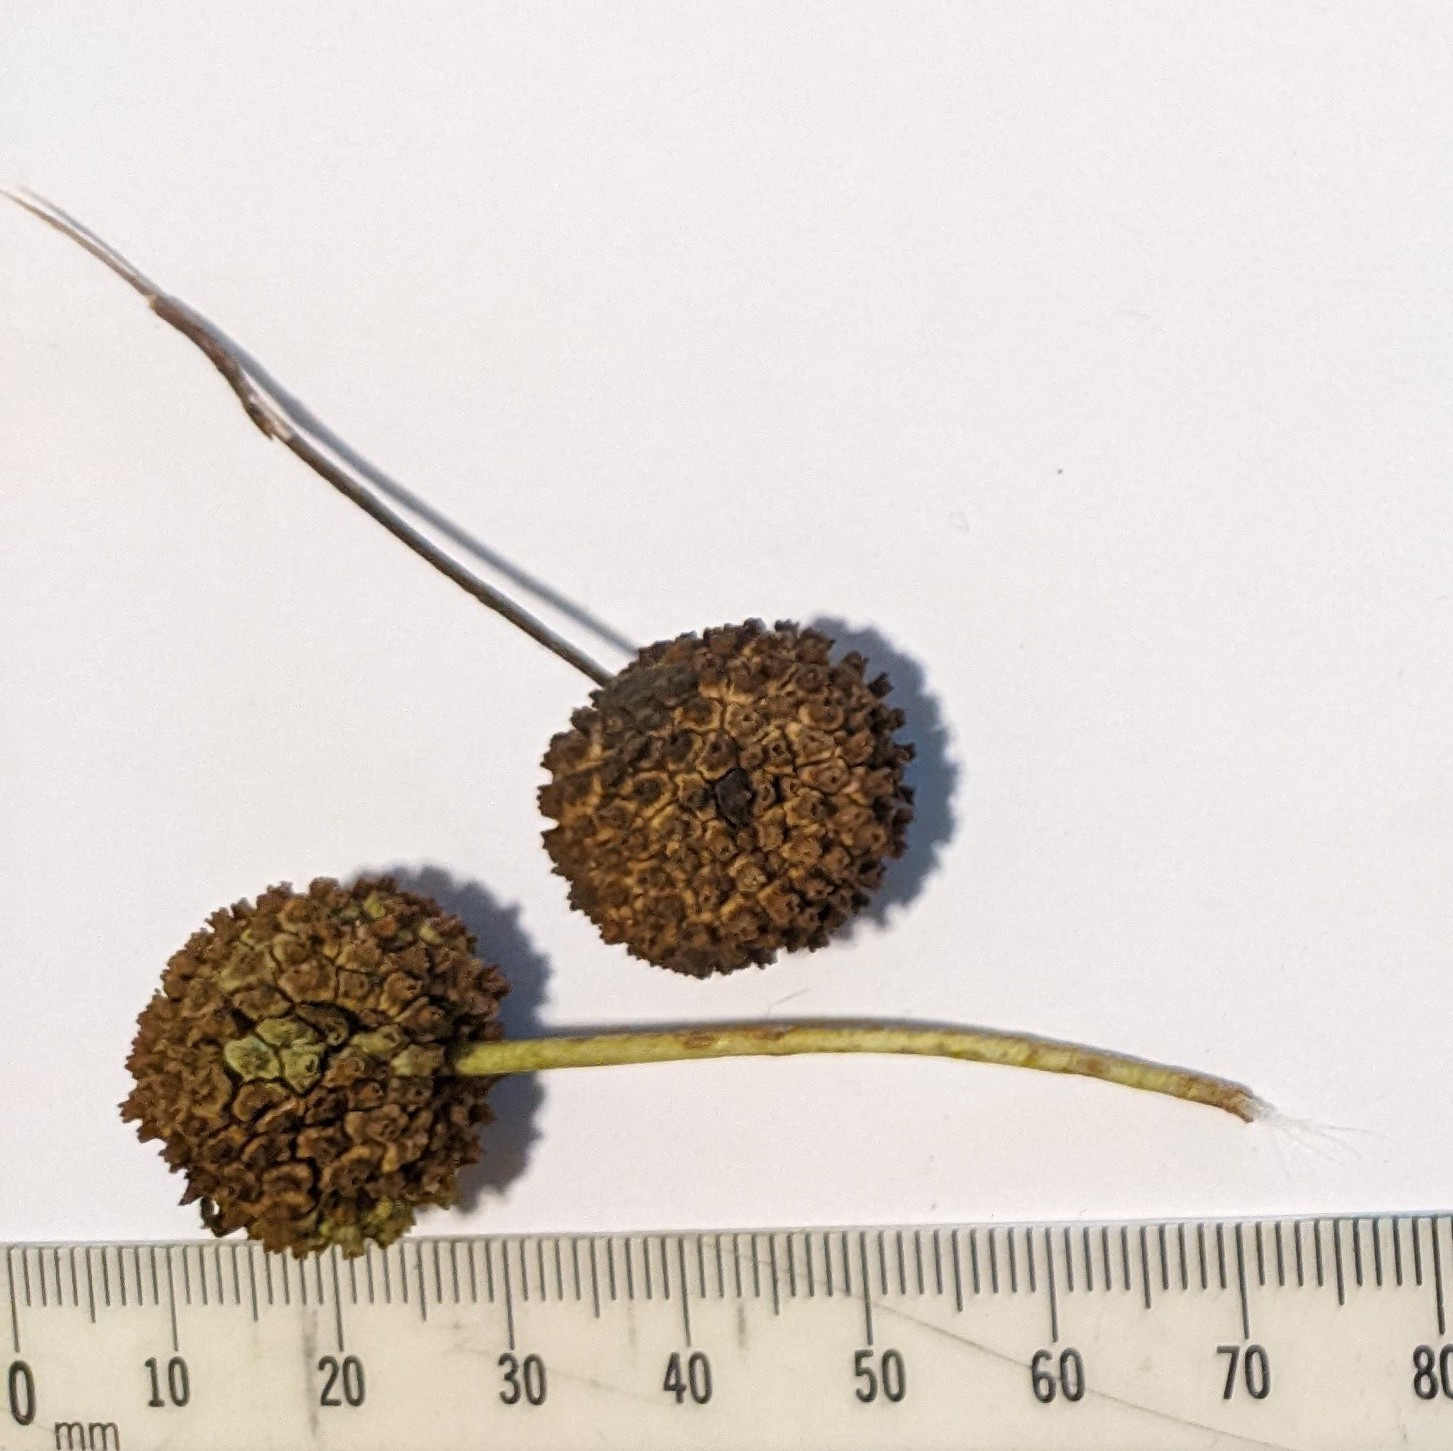 The Scientific Name is Cephalanthus occidentalis. You will likely hear them called Buttonbush. This picture shows the Flower heads mature into hard spherical ball-like fruits consisting of multiple tiny two-seeded nutlets. of Cephalanthus occidentalis